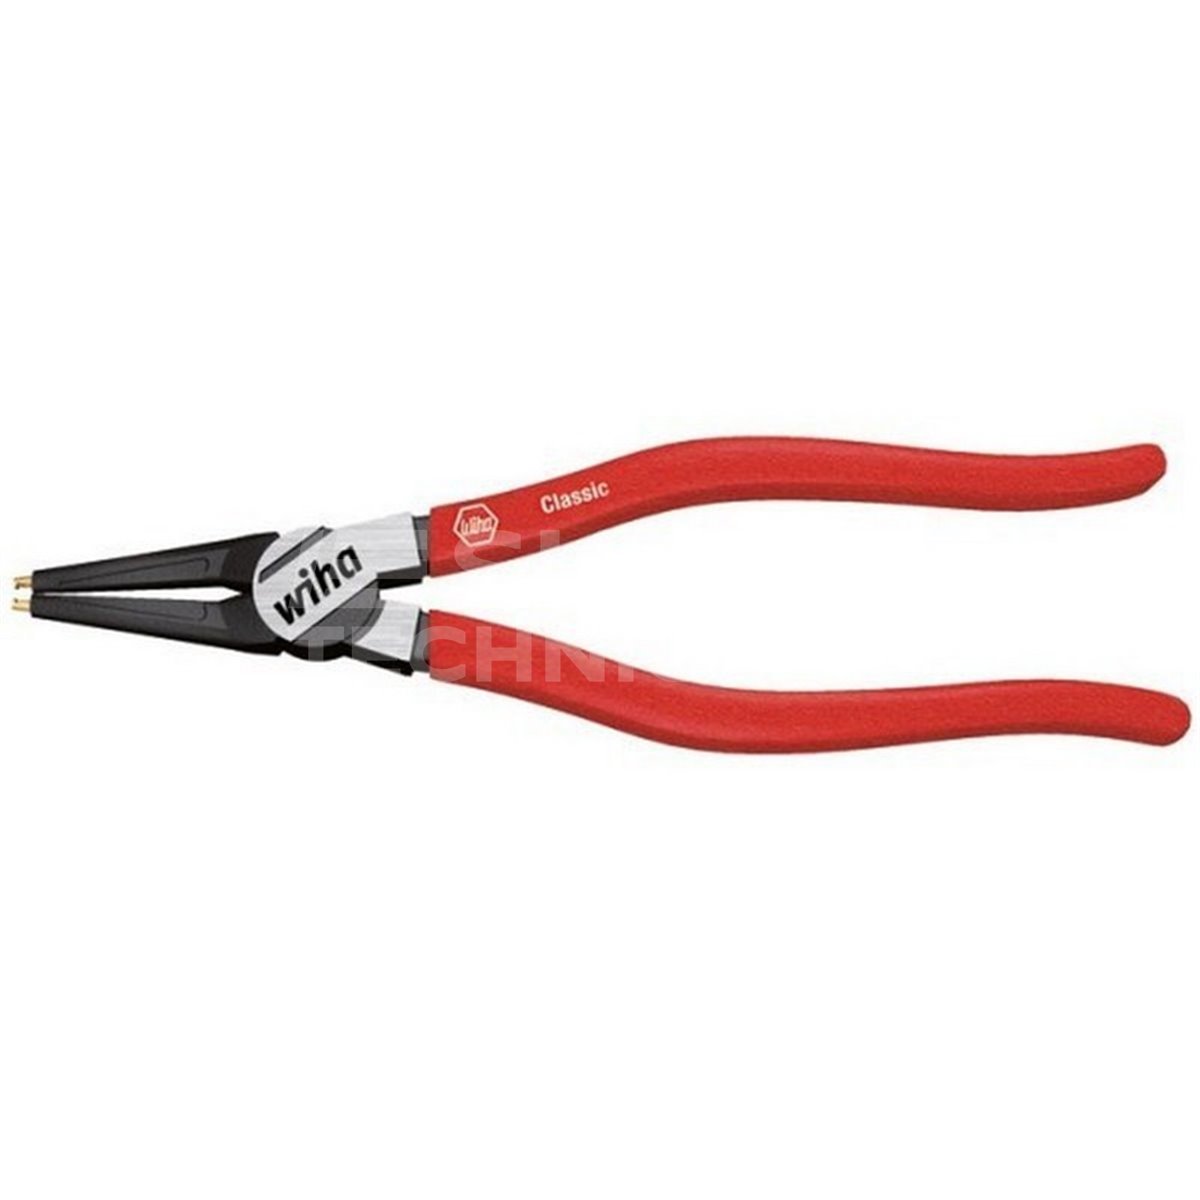 Classic Z33401 J1 140mm Ring Pliers in Wiha 36225 blister pack.